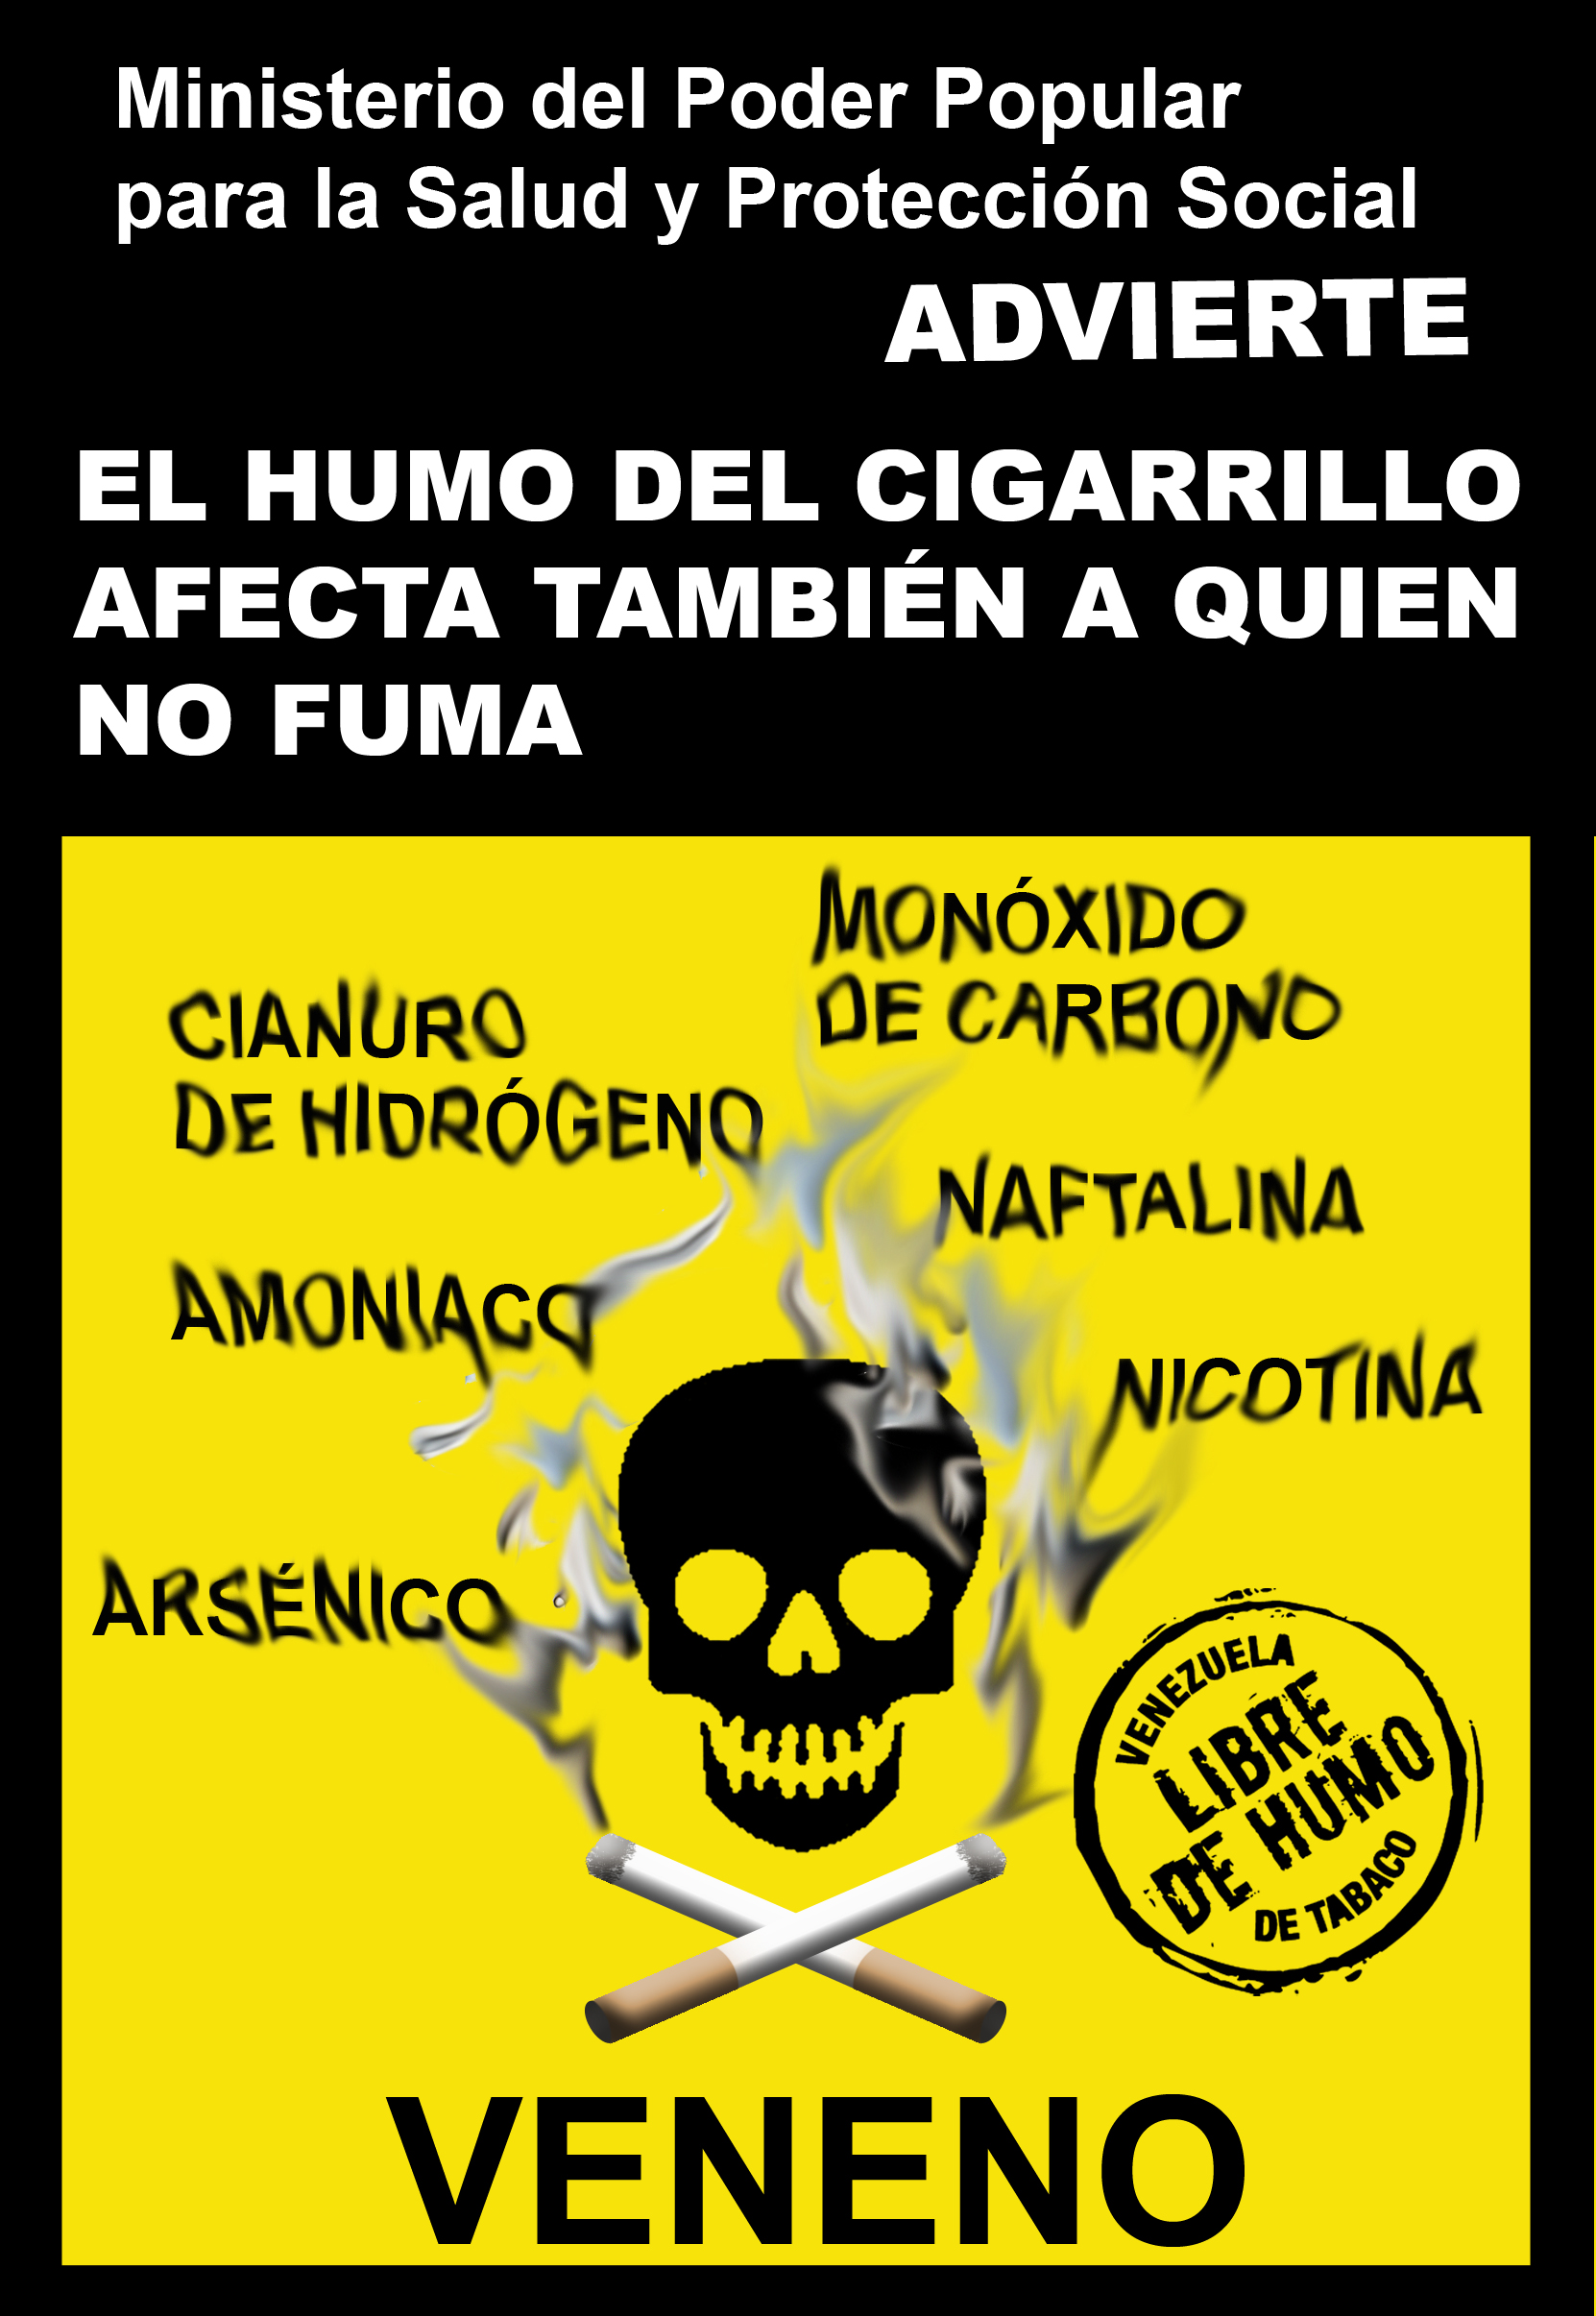 Venezuela 2009 ETS General - smoking affects non-smokers, skill and crossbones